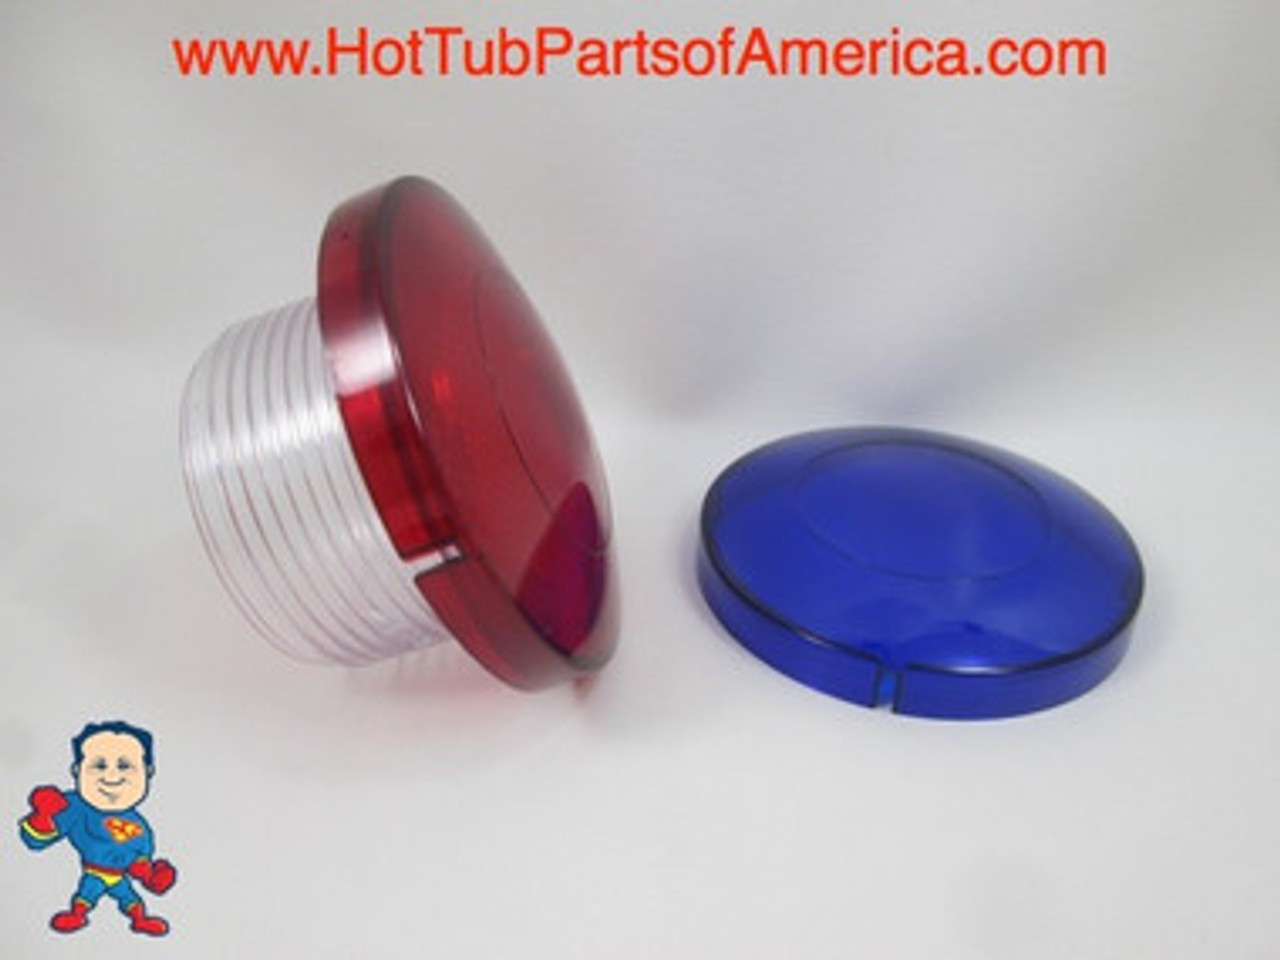 Red & Blue Lens Cover for Spa Hot Tub Light Lens 3 1/4" Video How To
This is an example of the lens cover installed on a lens face.. This listing is for the (2) Lens covers only all other parts are for illustration..